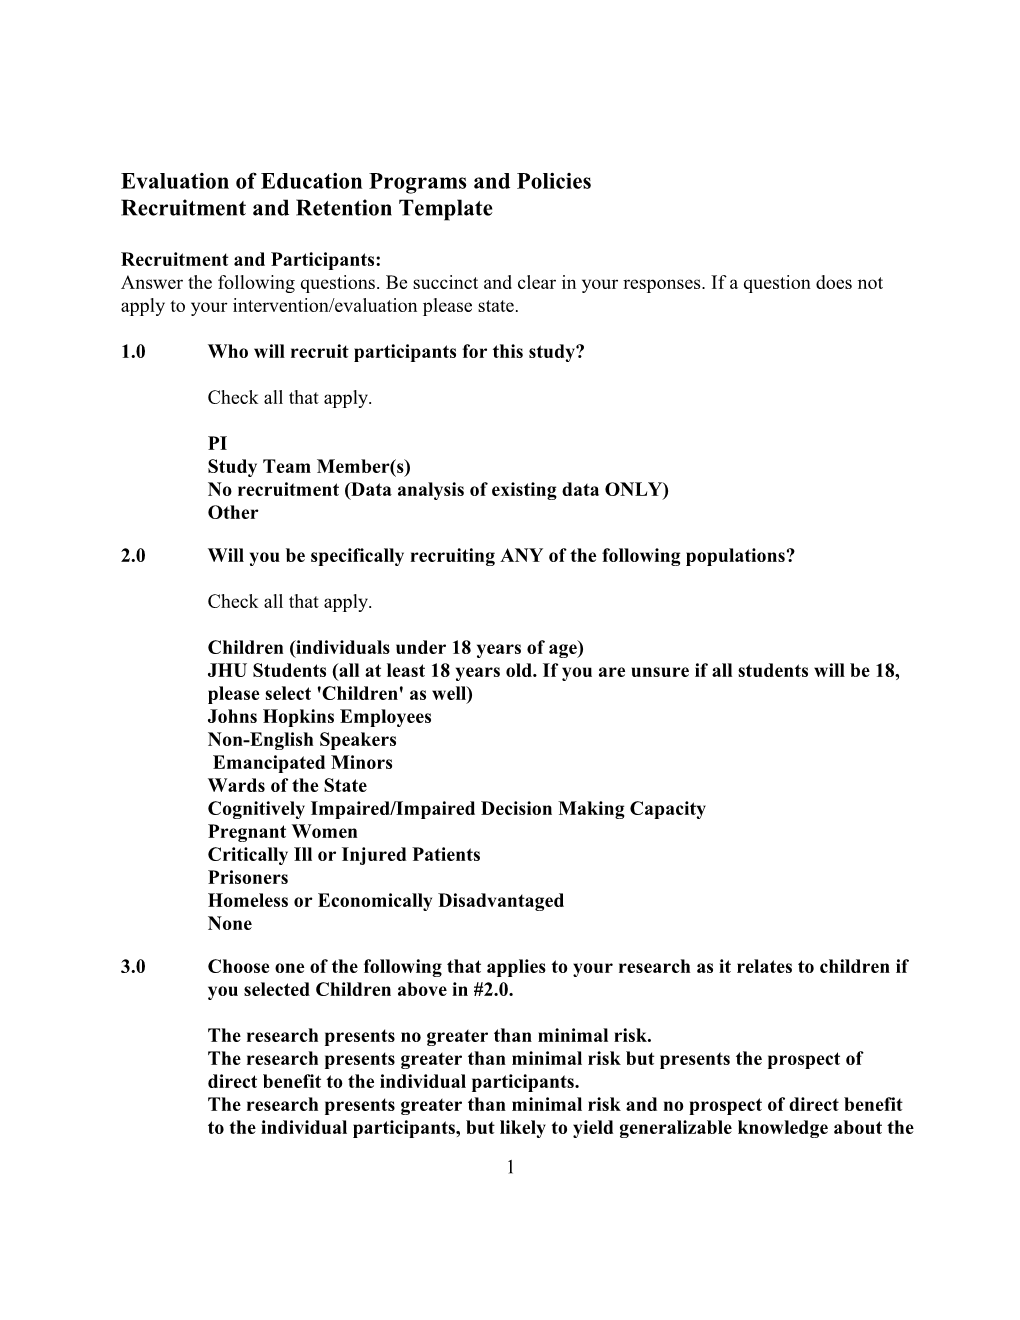 Evaluation of Education Programs and Policies